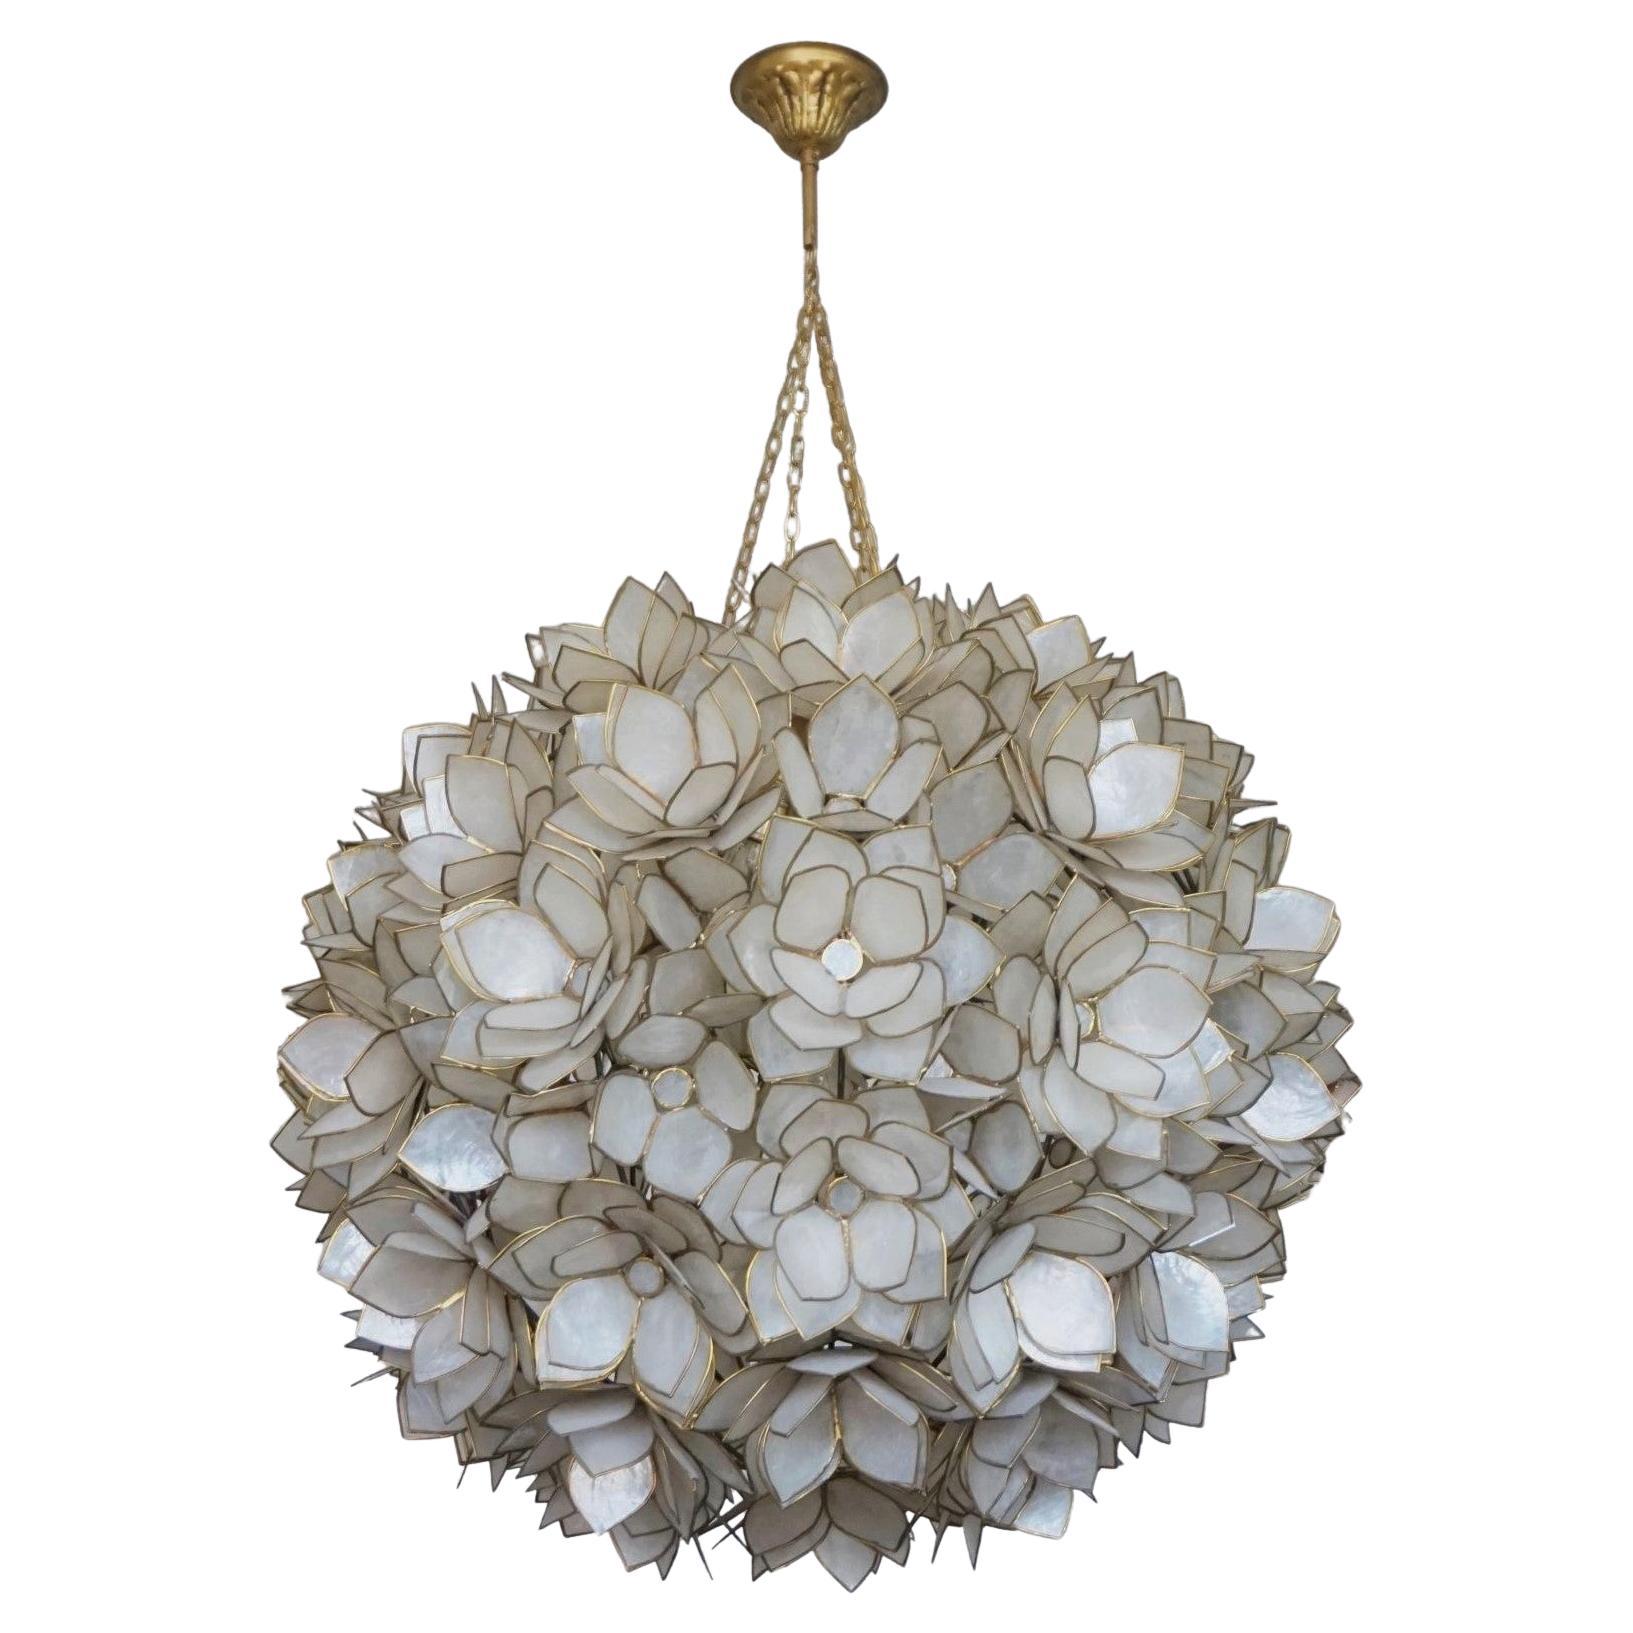 Large Handcrafted Capiz Shell Three-Light Lotus Ball Chandelier by Rausch, 1960s